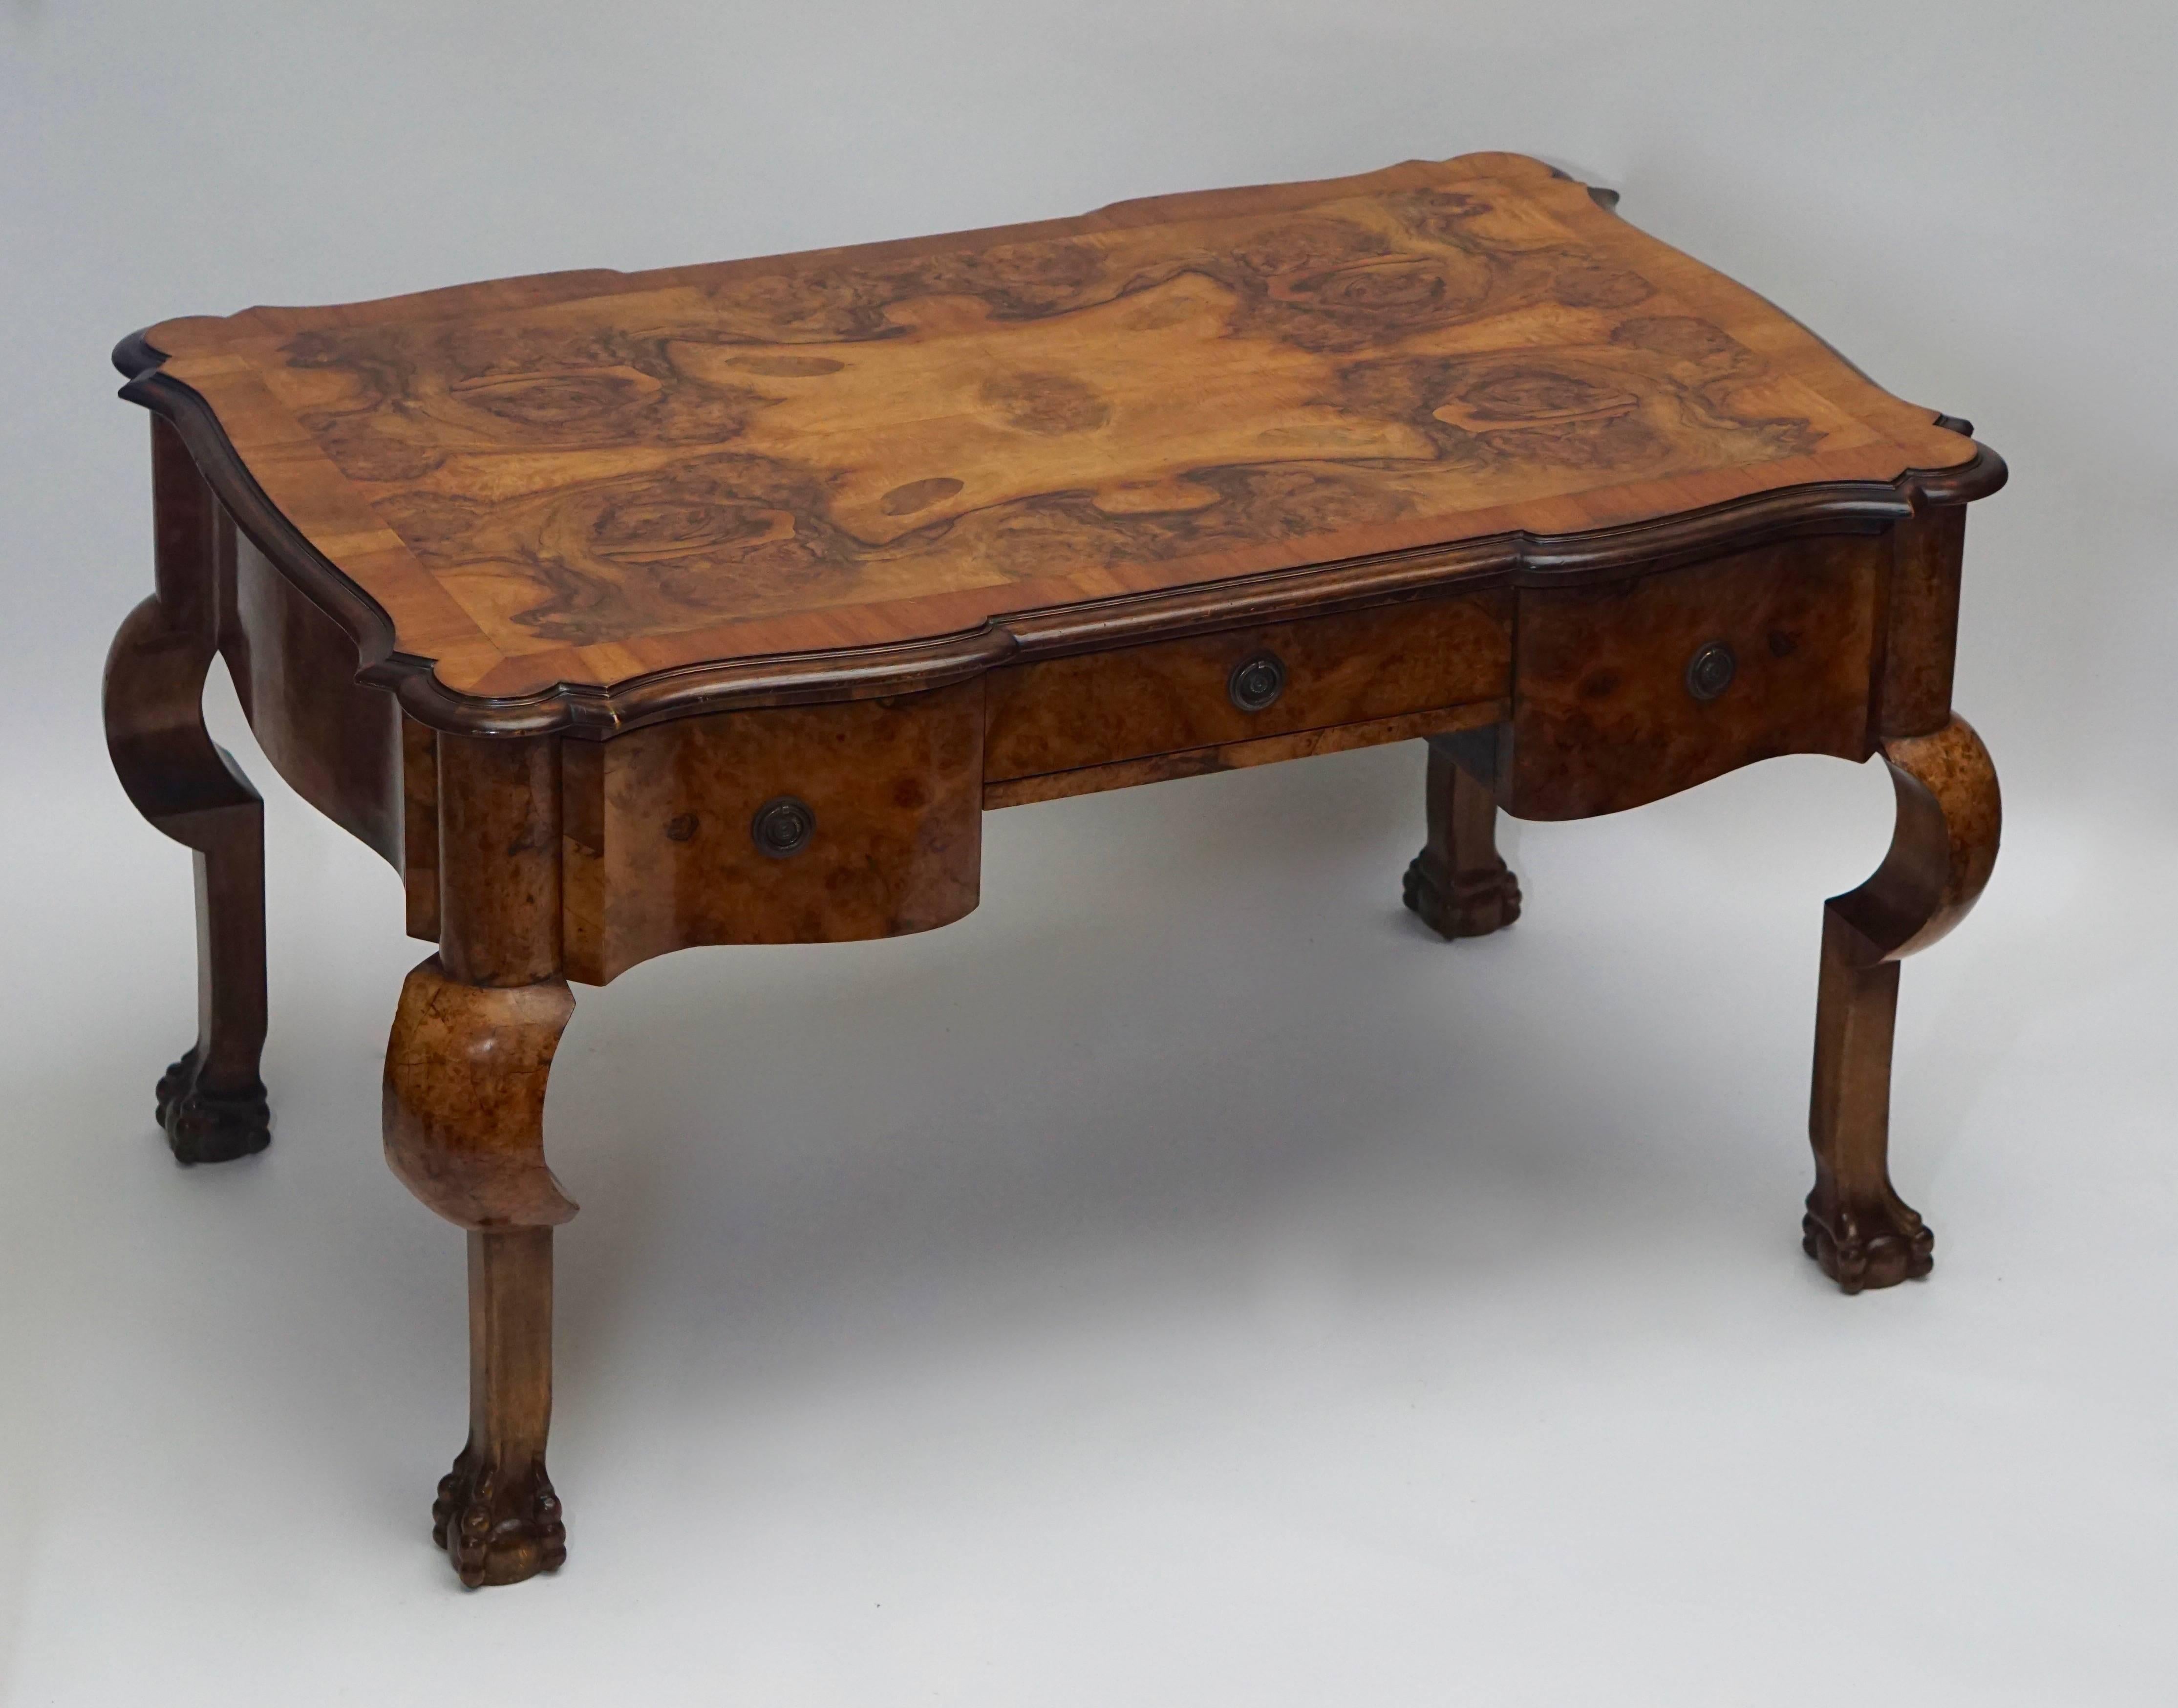 Magnificent 19th century burled walnut partners desk with original armchair and claw legs.

19th century burl walnut partners writing desk with armchair.This desk has functional curved drawers on both sides, a true partner's desk. This desk is made